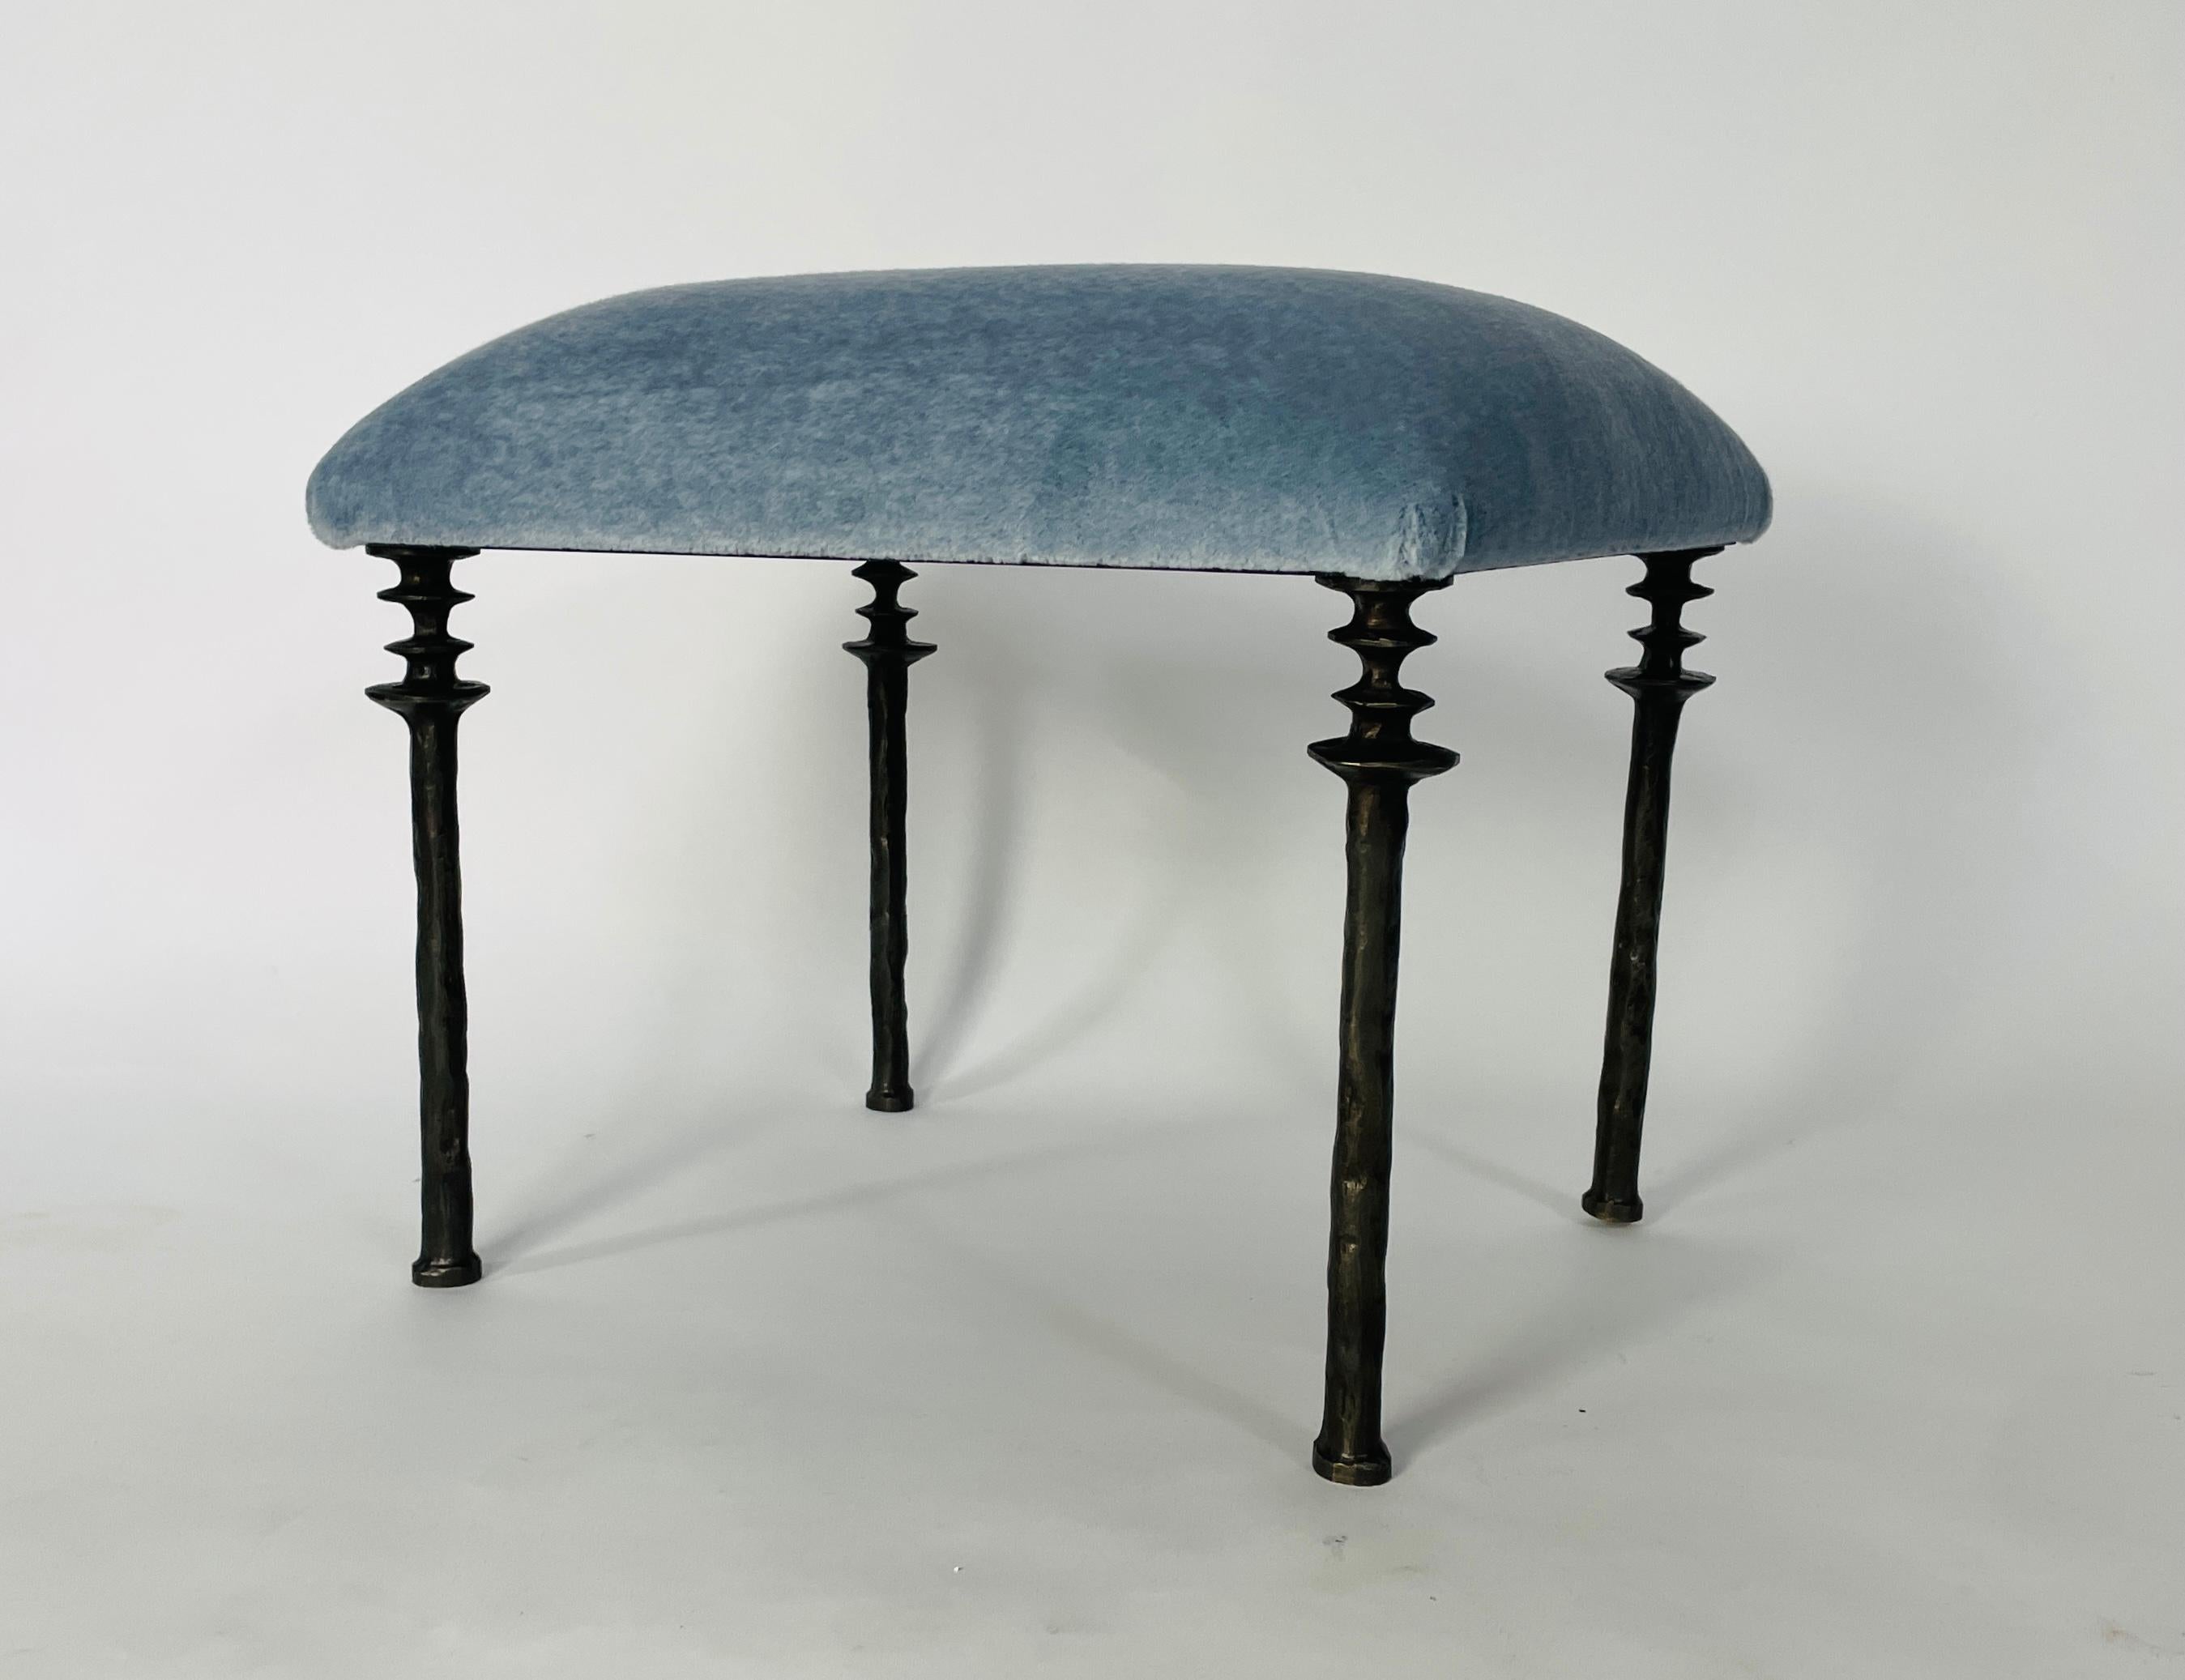 American Pair of Sorgue Stools, by Bourgeois Boheme Atelier, Blue Mohair Upholstery